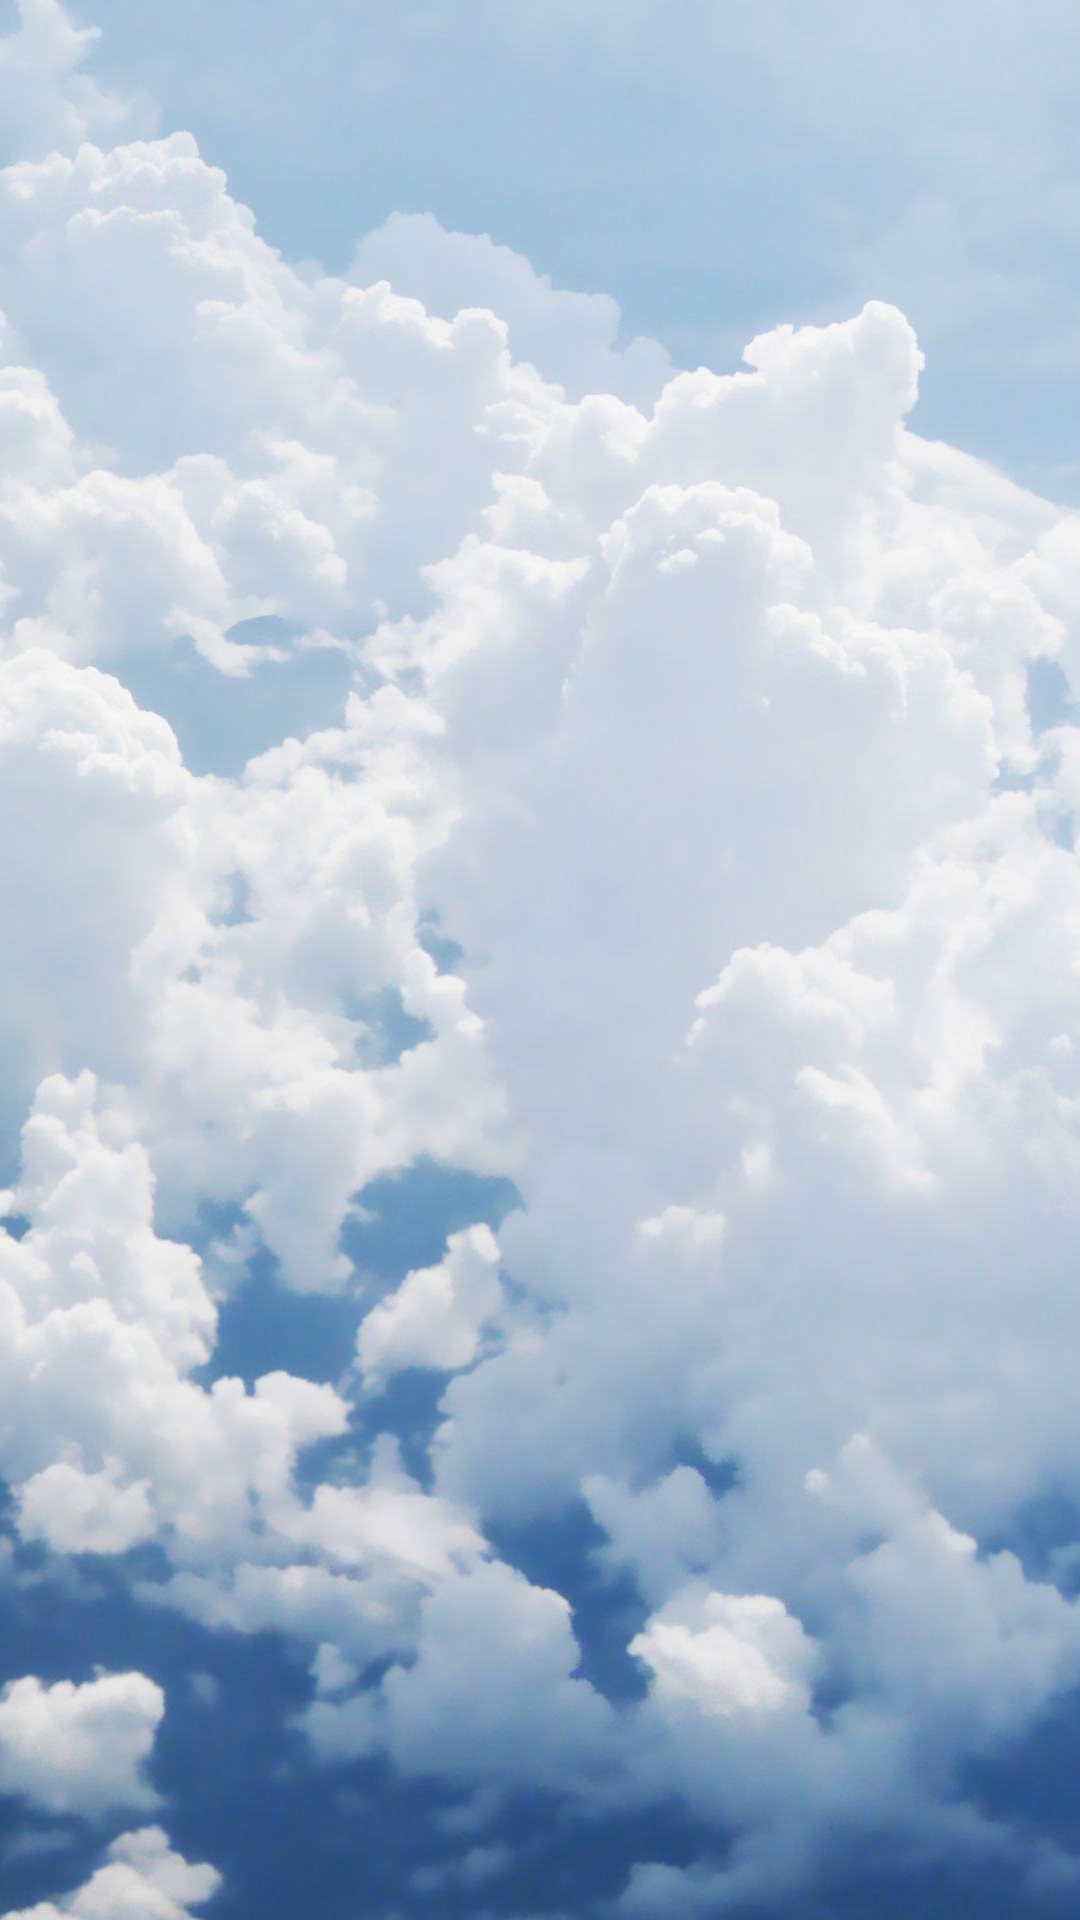 Puffy-White-Clouds-iPhone-6-wallpaper.